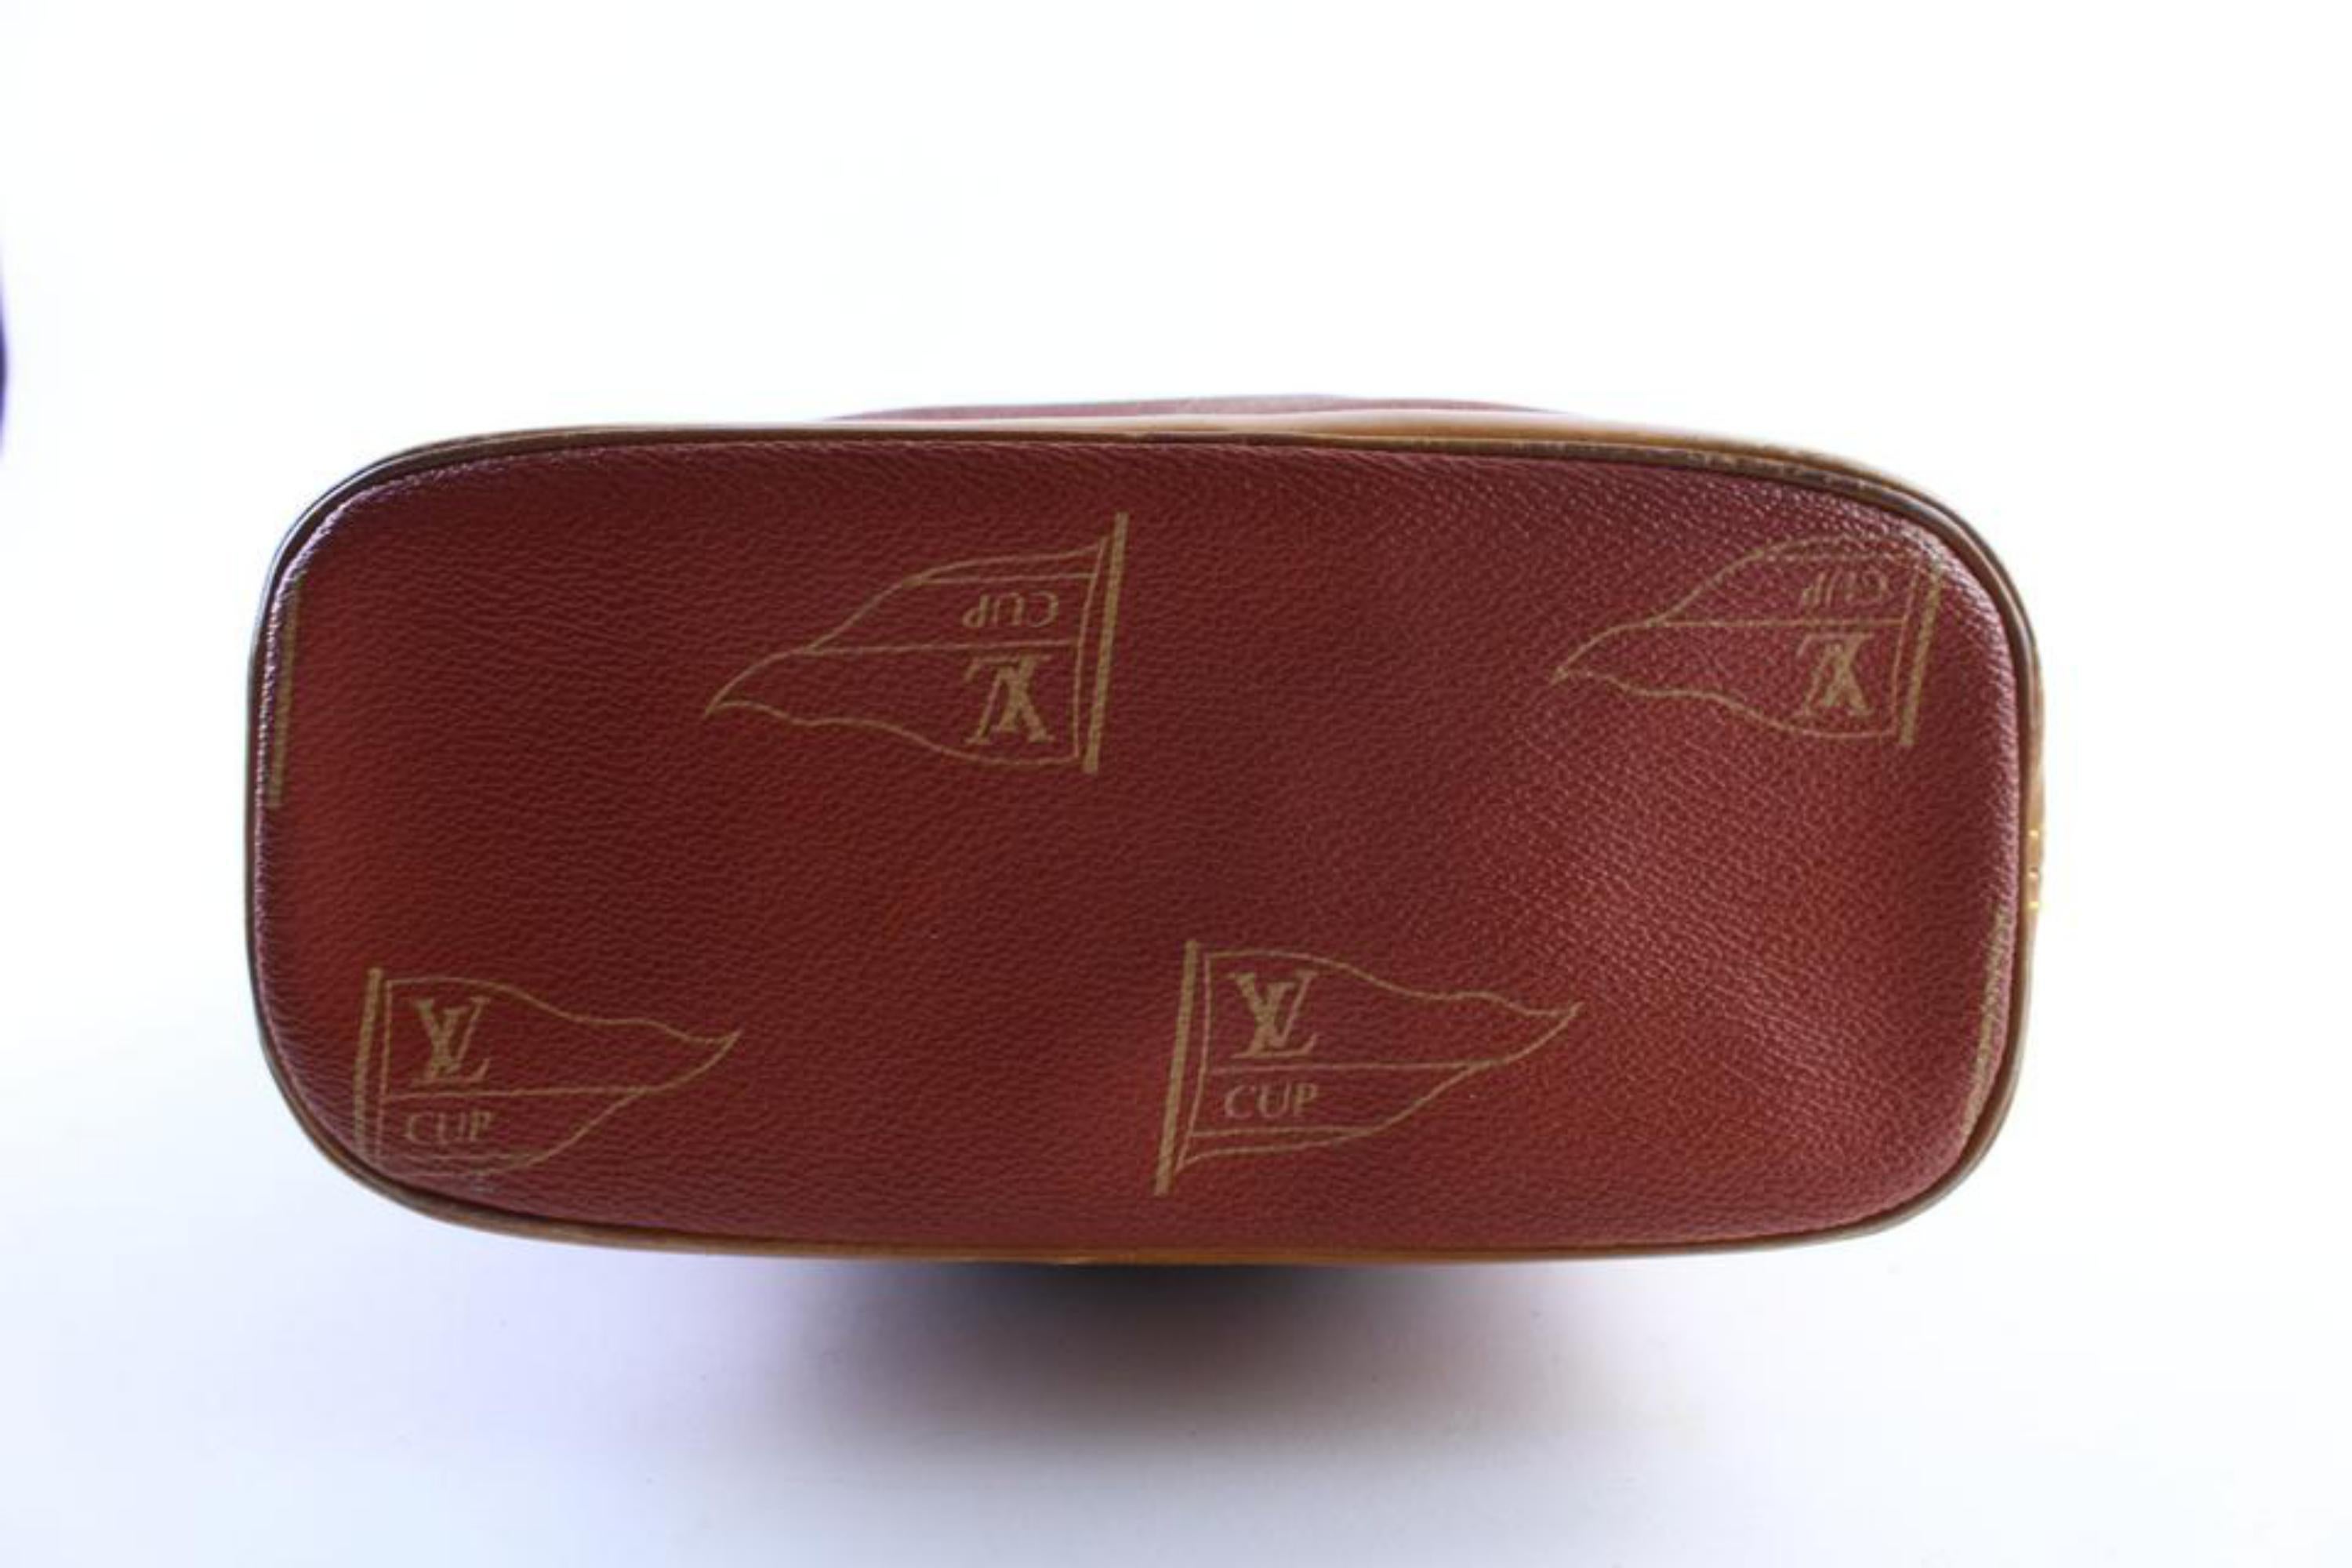 Louis Vuitton (Limited Edition) Lv Cup 22lr0426 Red Coated Canvas Cross Body Bag 8